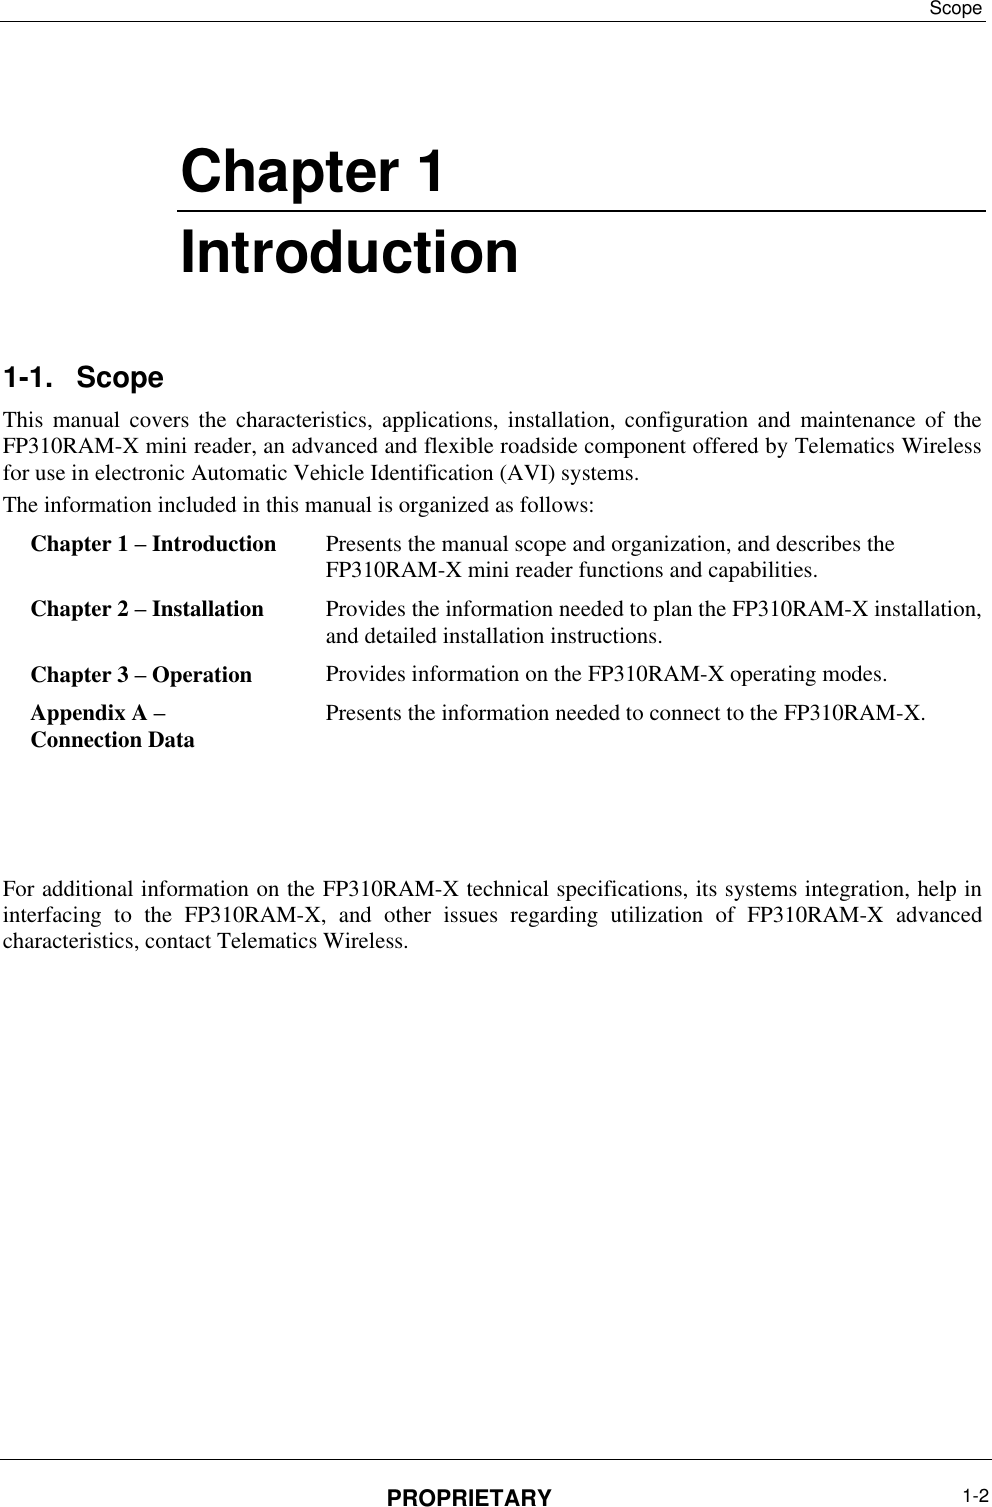 Scope PROPRIETARY  1-2    Chapter ‎1 Introduction 1-1.  Scope This  manual  covers  the  characteristics,  applications,  installation,  configuration  and  maintenance  of  the FP310RAM-X mini reader, an advanced and flexible roadside component offered by Telematics Wireless for use in electronic Automatic Vehicle Identification (AVI) systems.  The information included in this manual is organized as follows: Presents the manual scope and organization, and describes the FP310RAM-X mini reader functions and capabilities.  Chapter 1 – Introduction Provides the information needed to plan the FP310RAM-X installation, and detailed installation instructions. Chapter 2 – Installation  Provides information on the FP310RAM-X operating modes. Chapter 3 – Operation  Presents the information needed to connect to the FP310RAM-X. Appendix A –  Connection Data      For additional information on the FP310RAM-X technical specifications, its systems integration, help in interfacing  to  the  FP310RAM-X,  and  other  issues  regarding  utilization  of  FP310RAM-X  advanced characteristics, contact Telematics Wireless. 